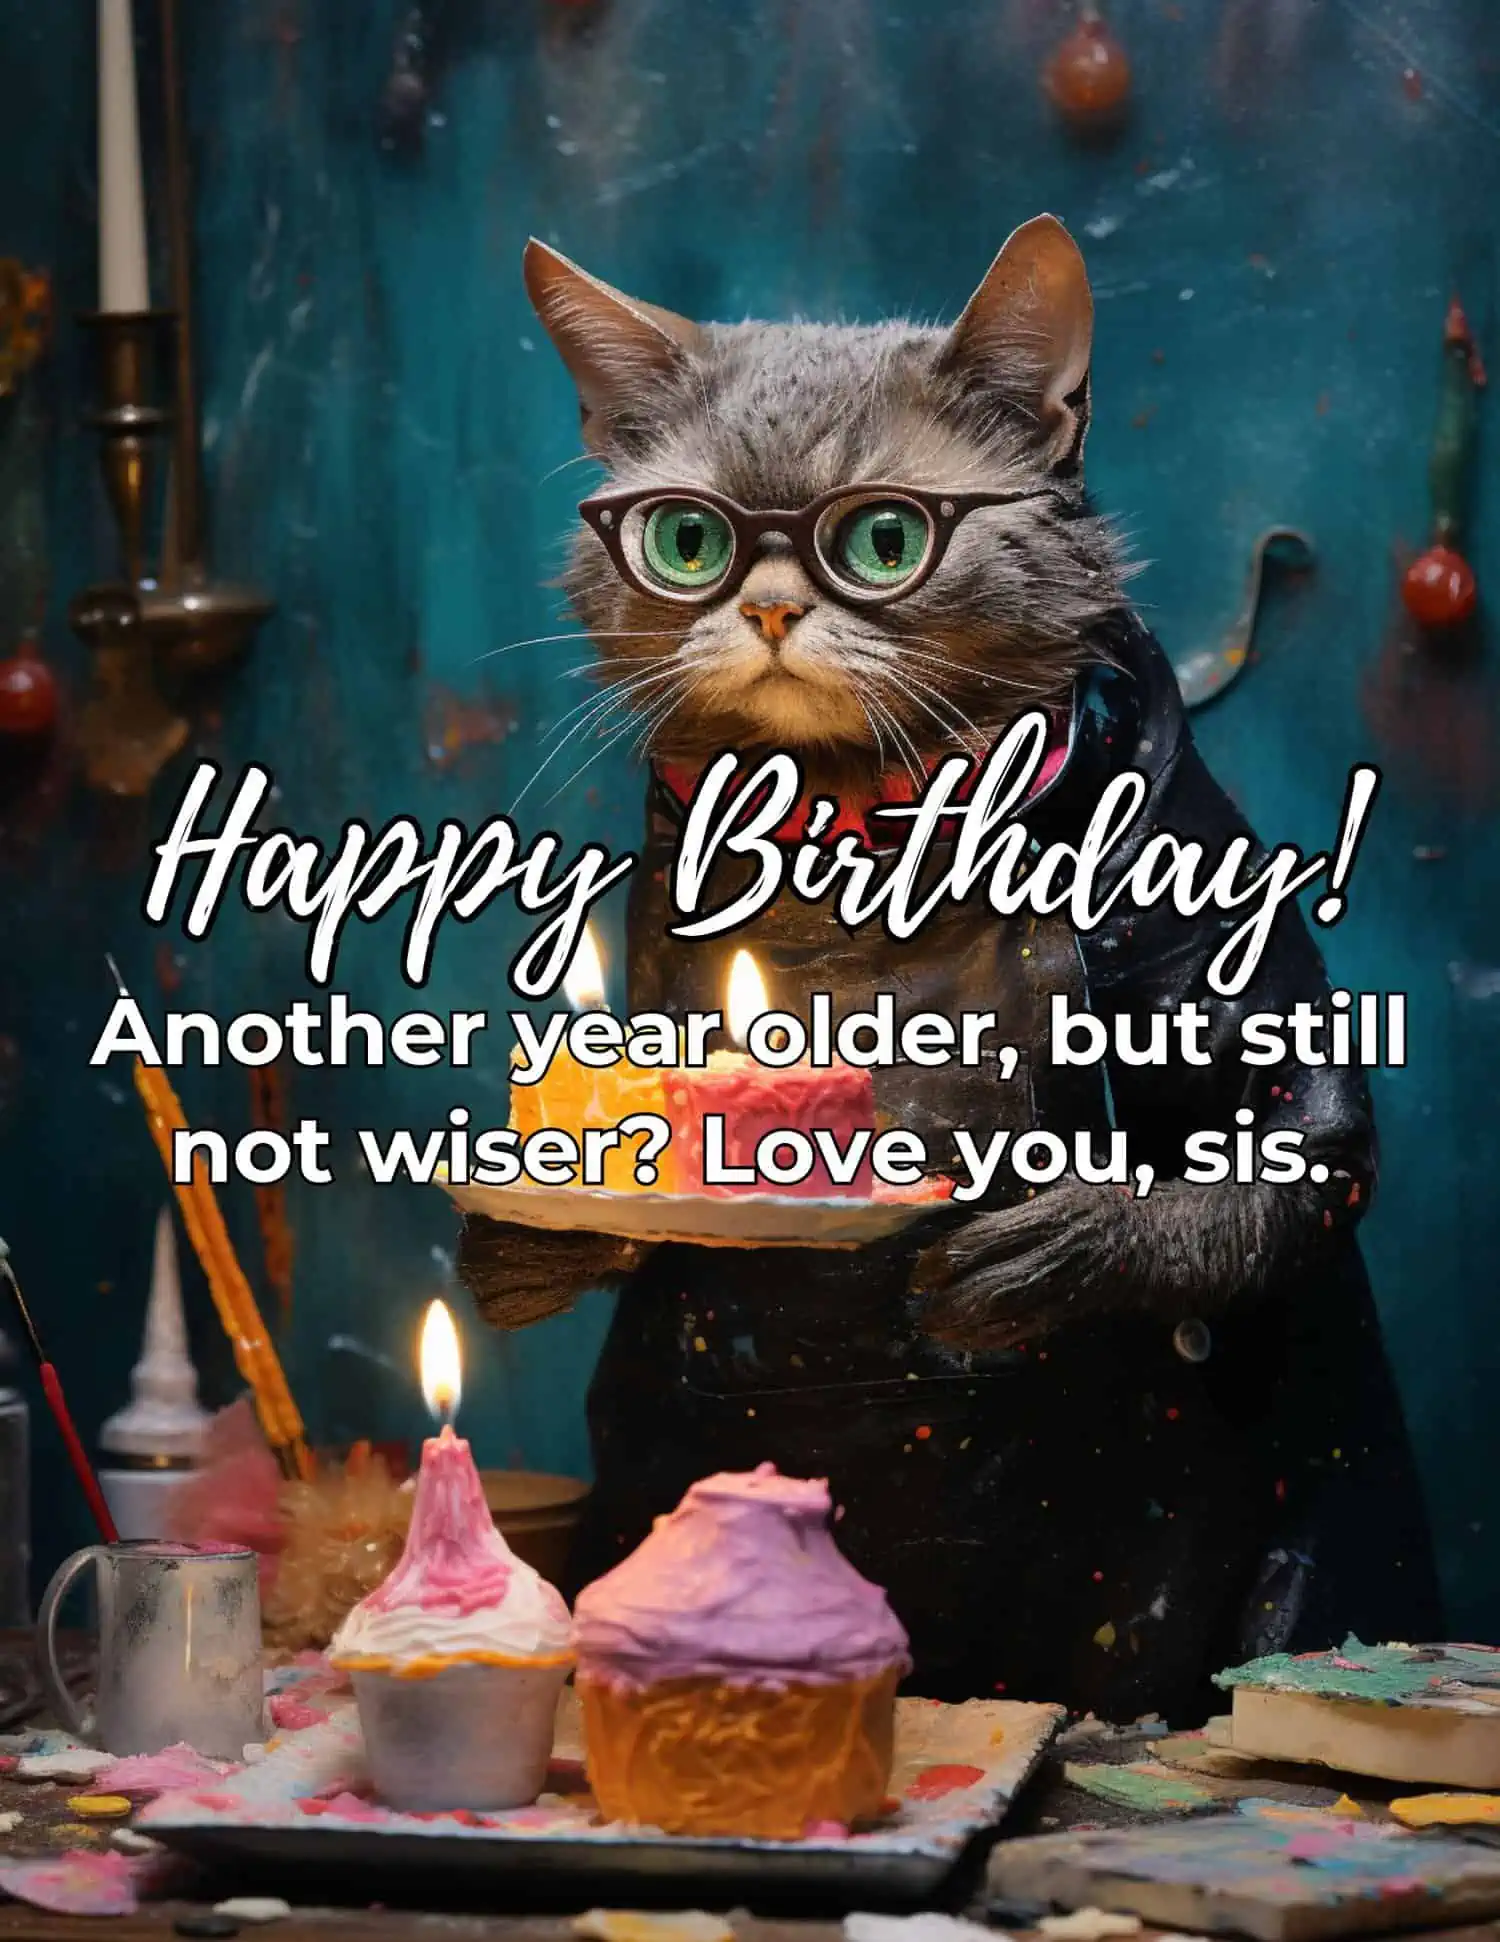 A series of humorous and light-hearted birthday wishes tailored for sisters.